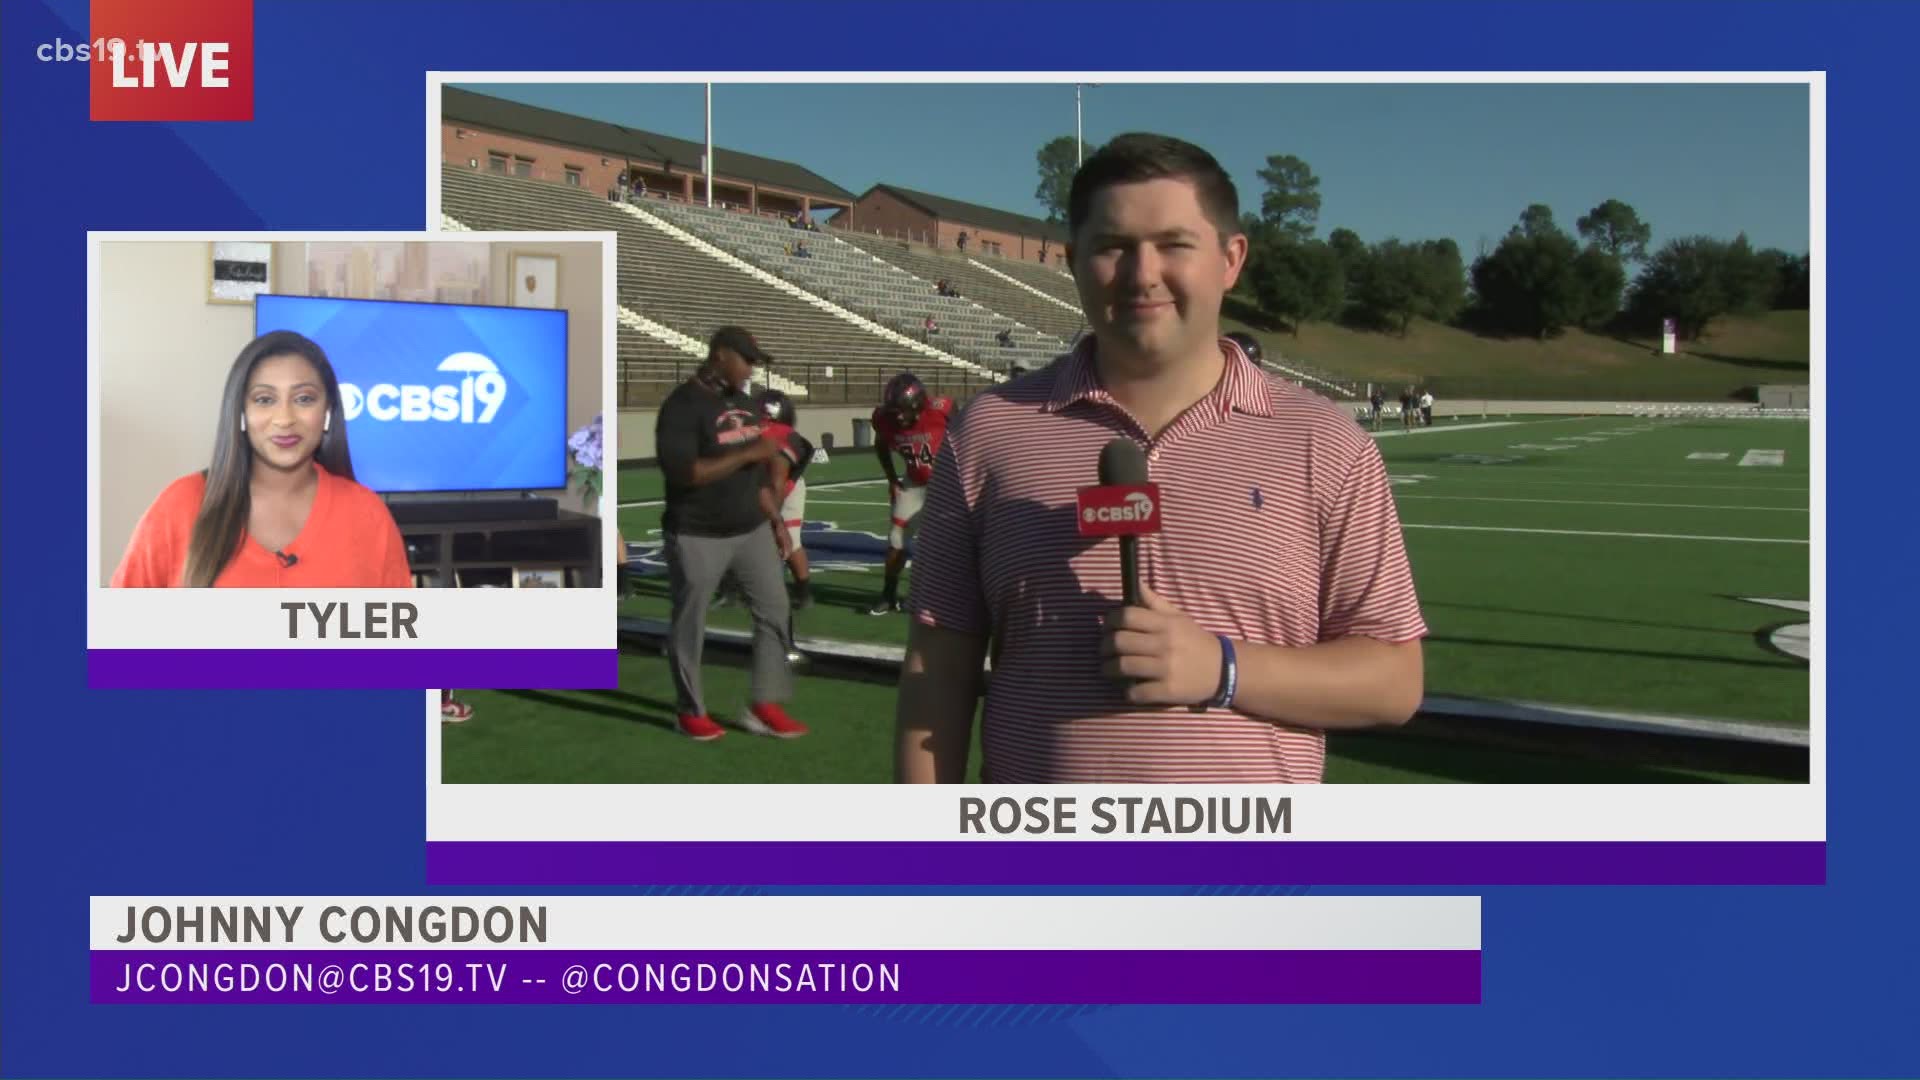 Johnny Congdon is out at Rose Stadium in Tyler getting you ready for week 8 of the East Texas high school football season.